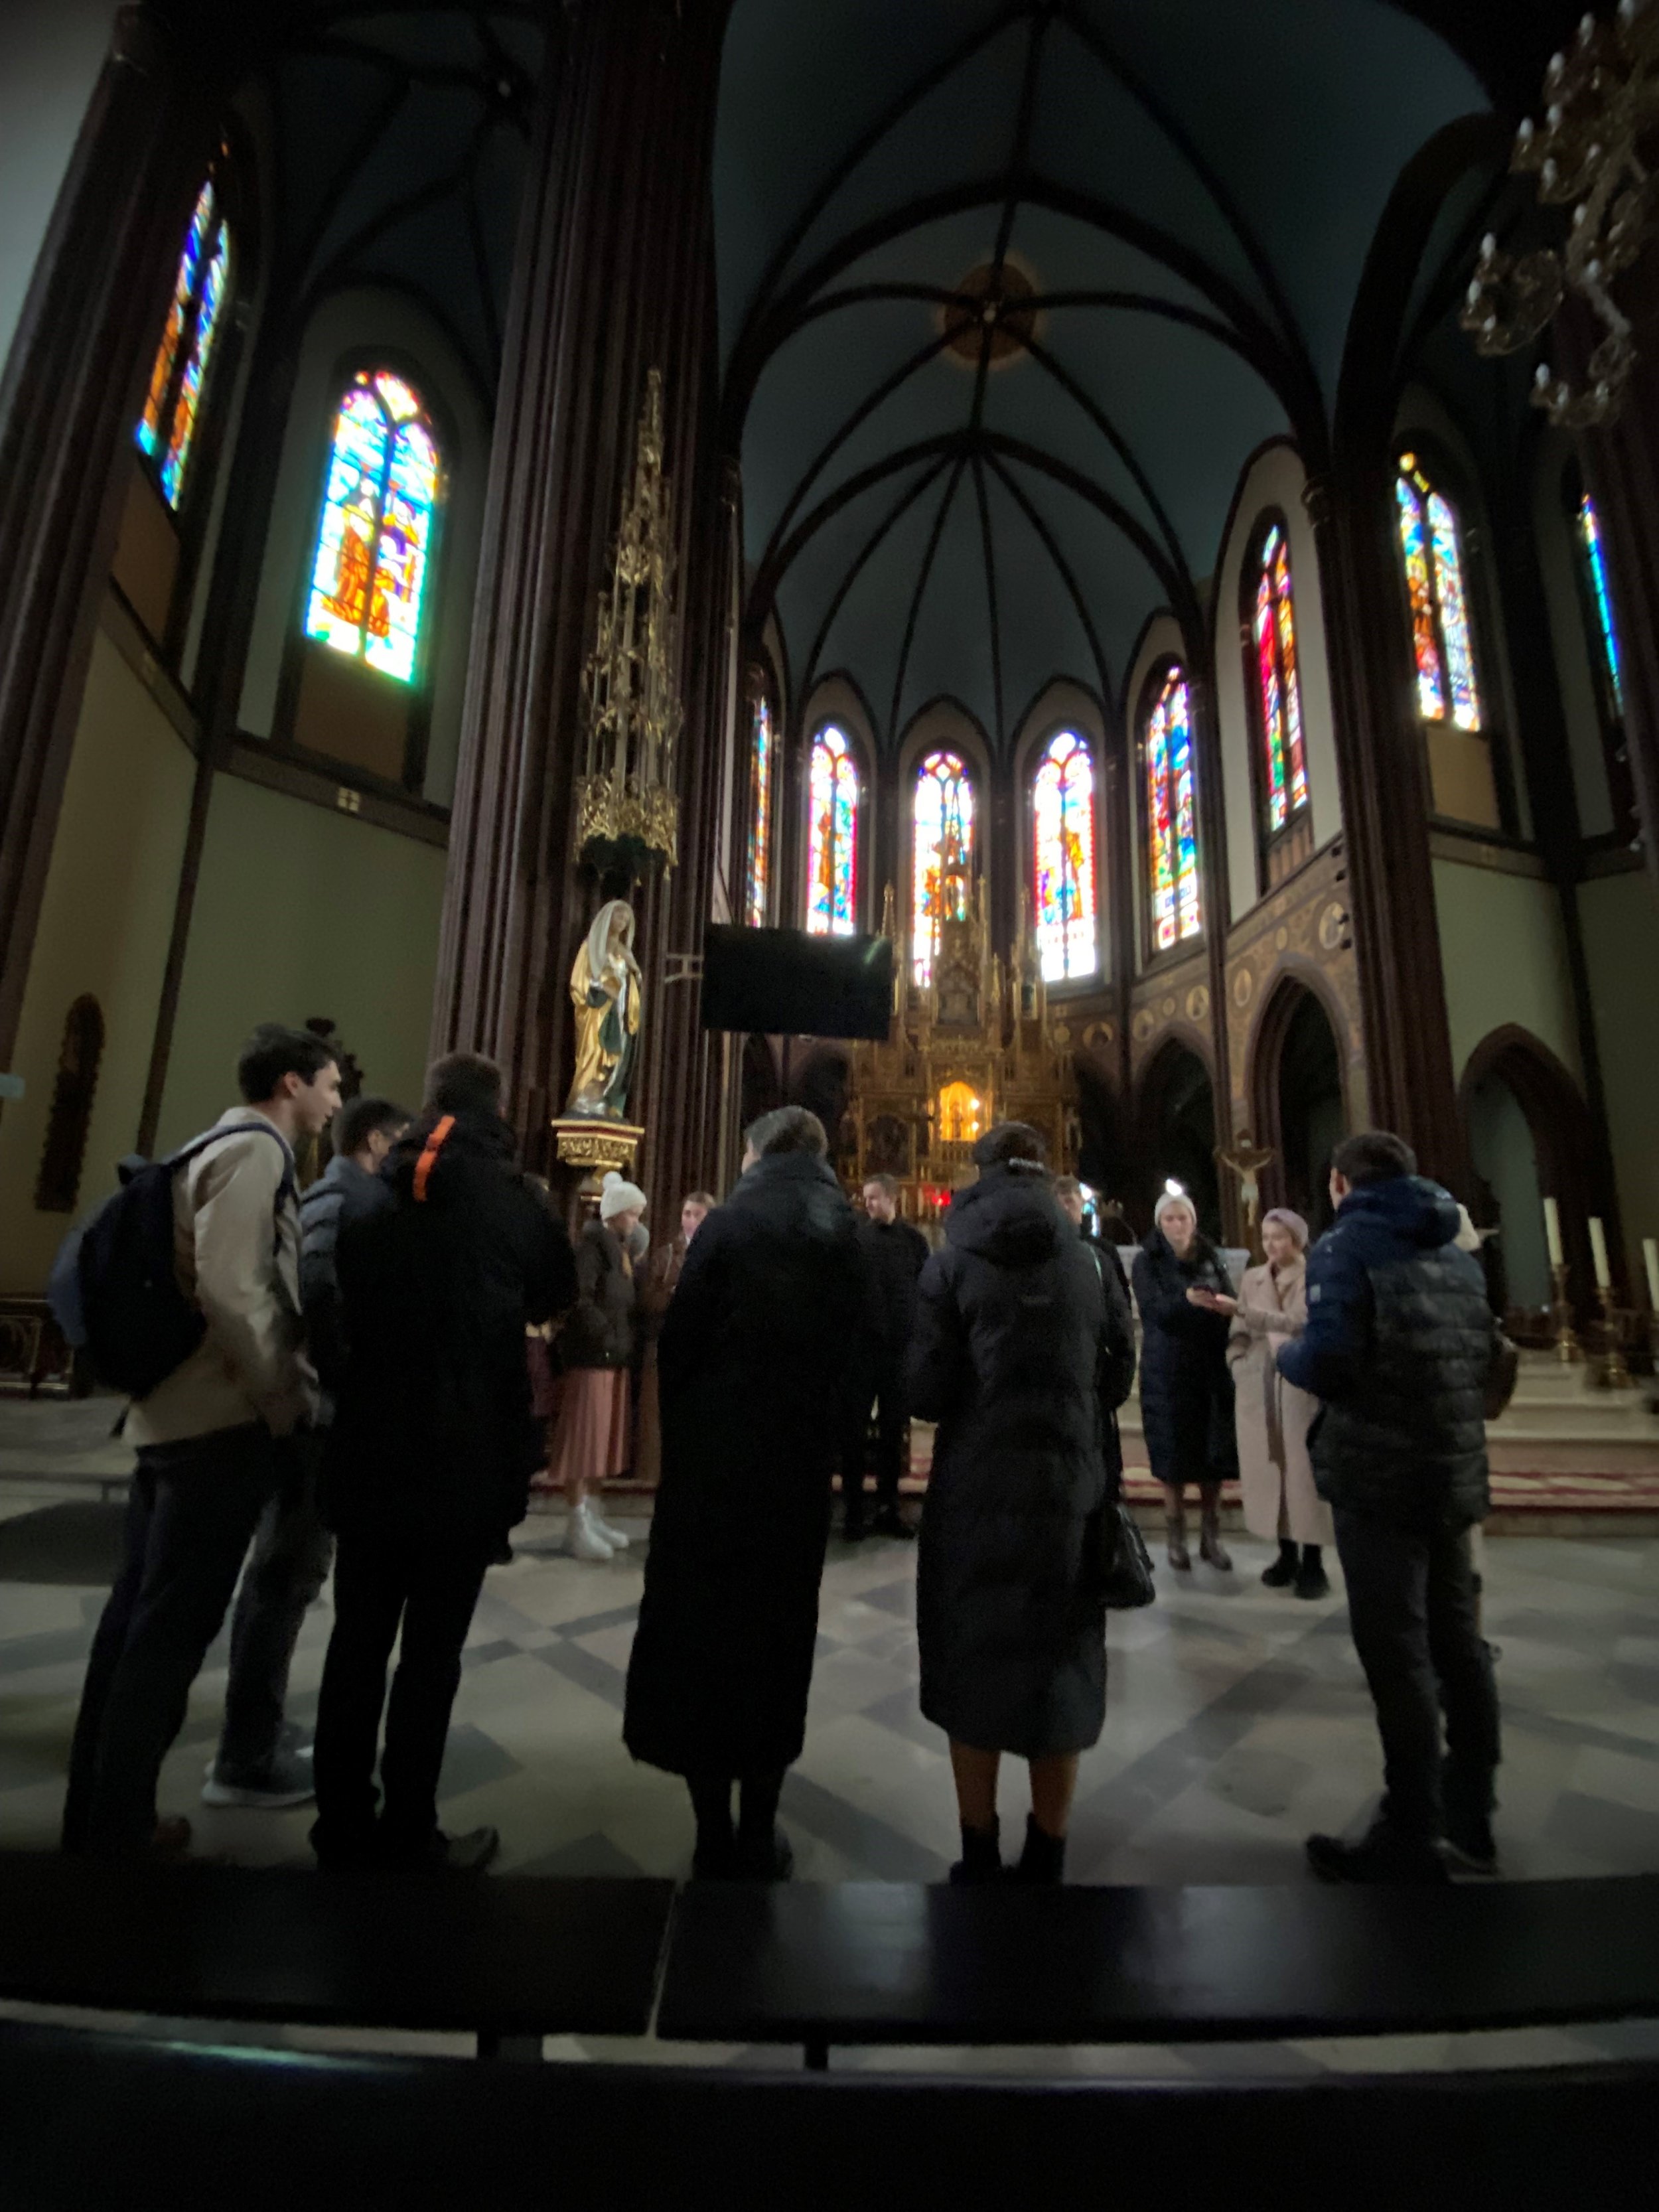 Refugees enjoy the acoustics in a Catholic cathedral as they sing Gospel songs